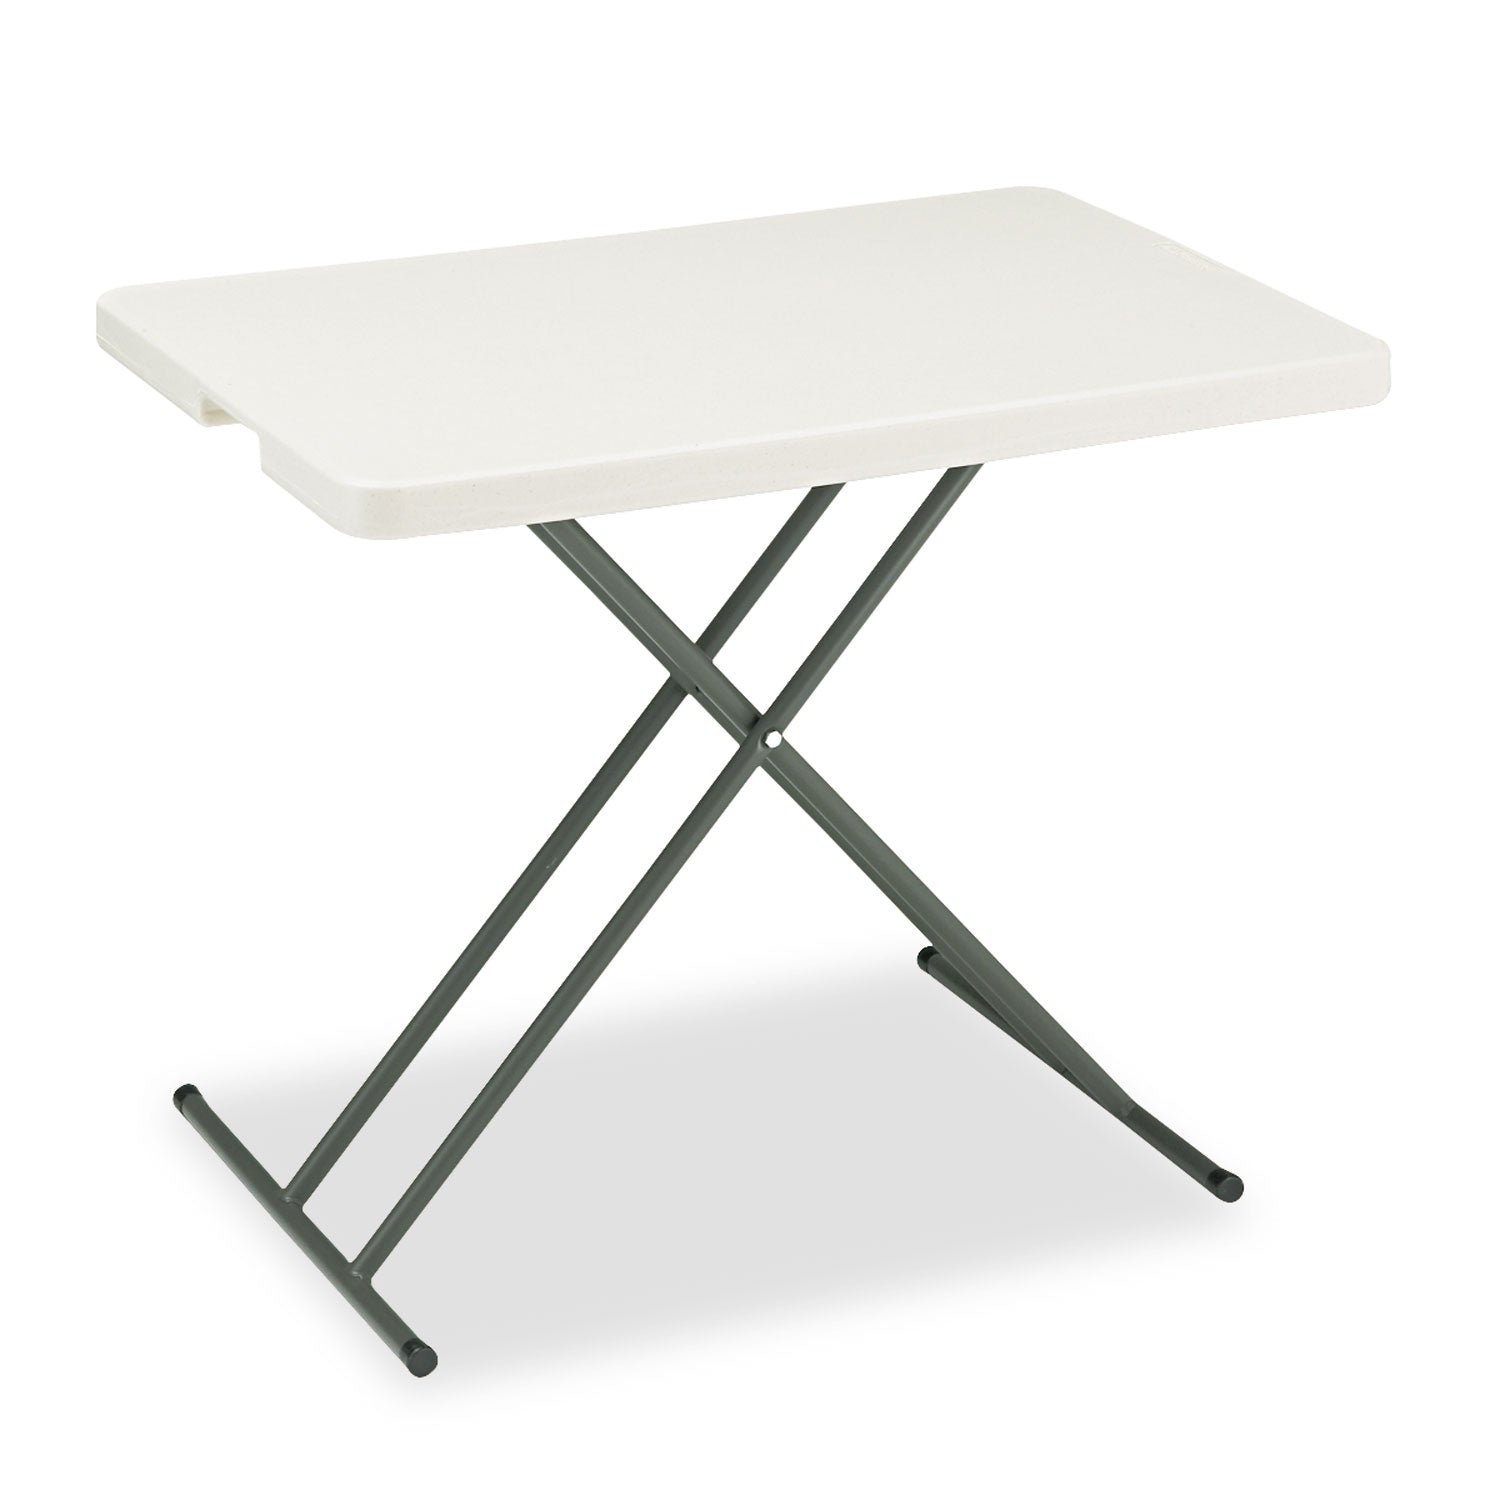 IndestrucTable Classic Personal Folding Table, 30" x 20" x 25" to 28", Platinum/Gray - 